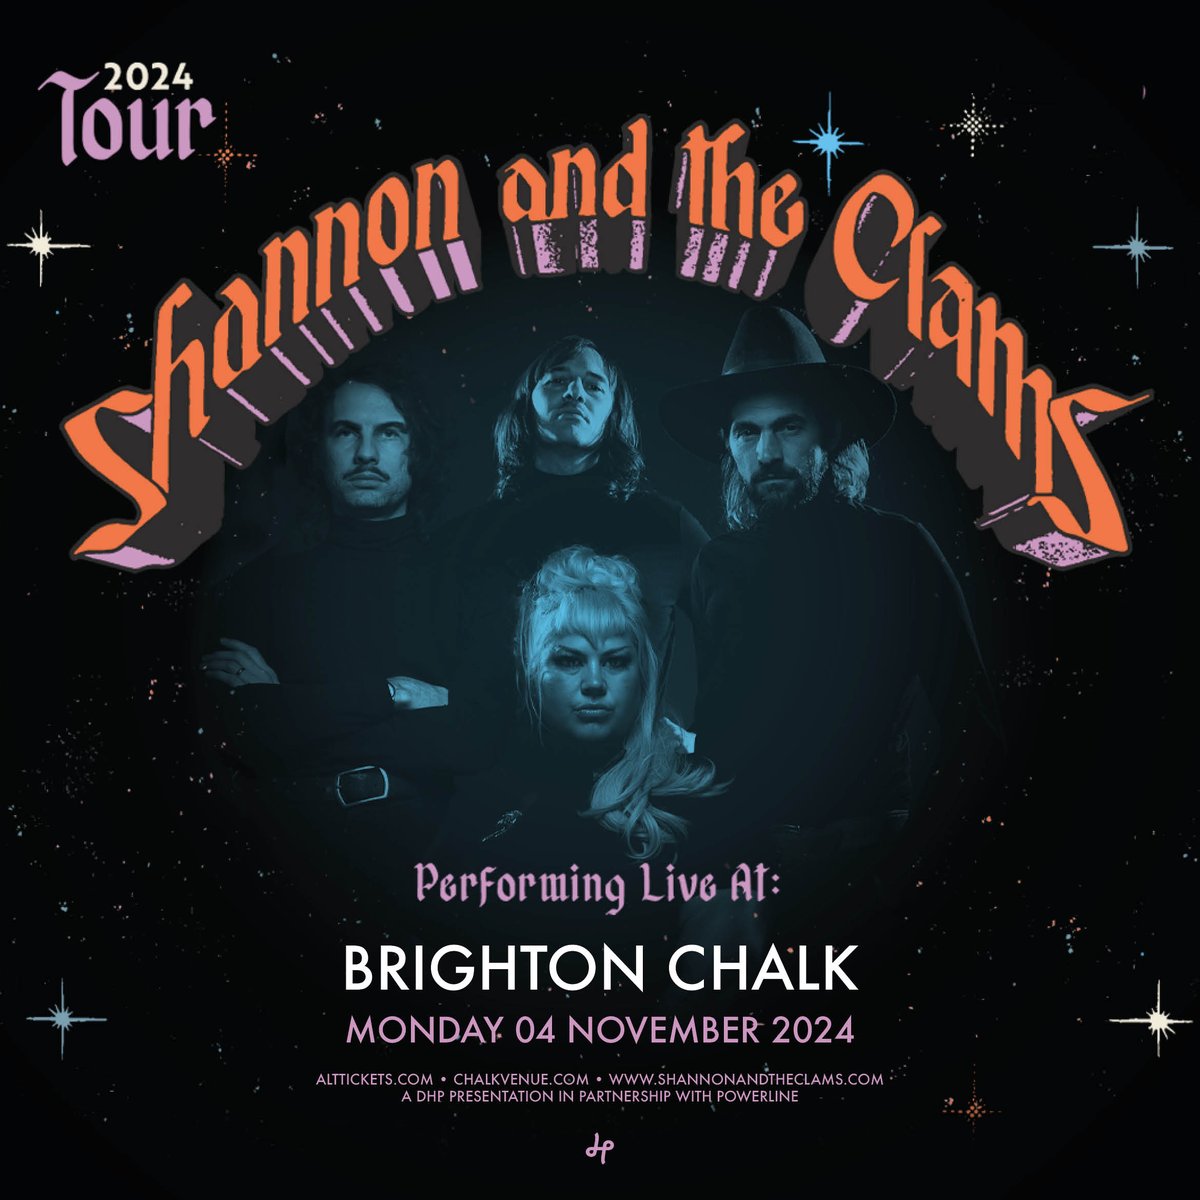 Indie garage punks @shanandtheclams have just announced a show at @chalkvenue in Brighton on 4th November! Tickets are on sale Friday, set a reminder: tinyurl.com/4hksbmum